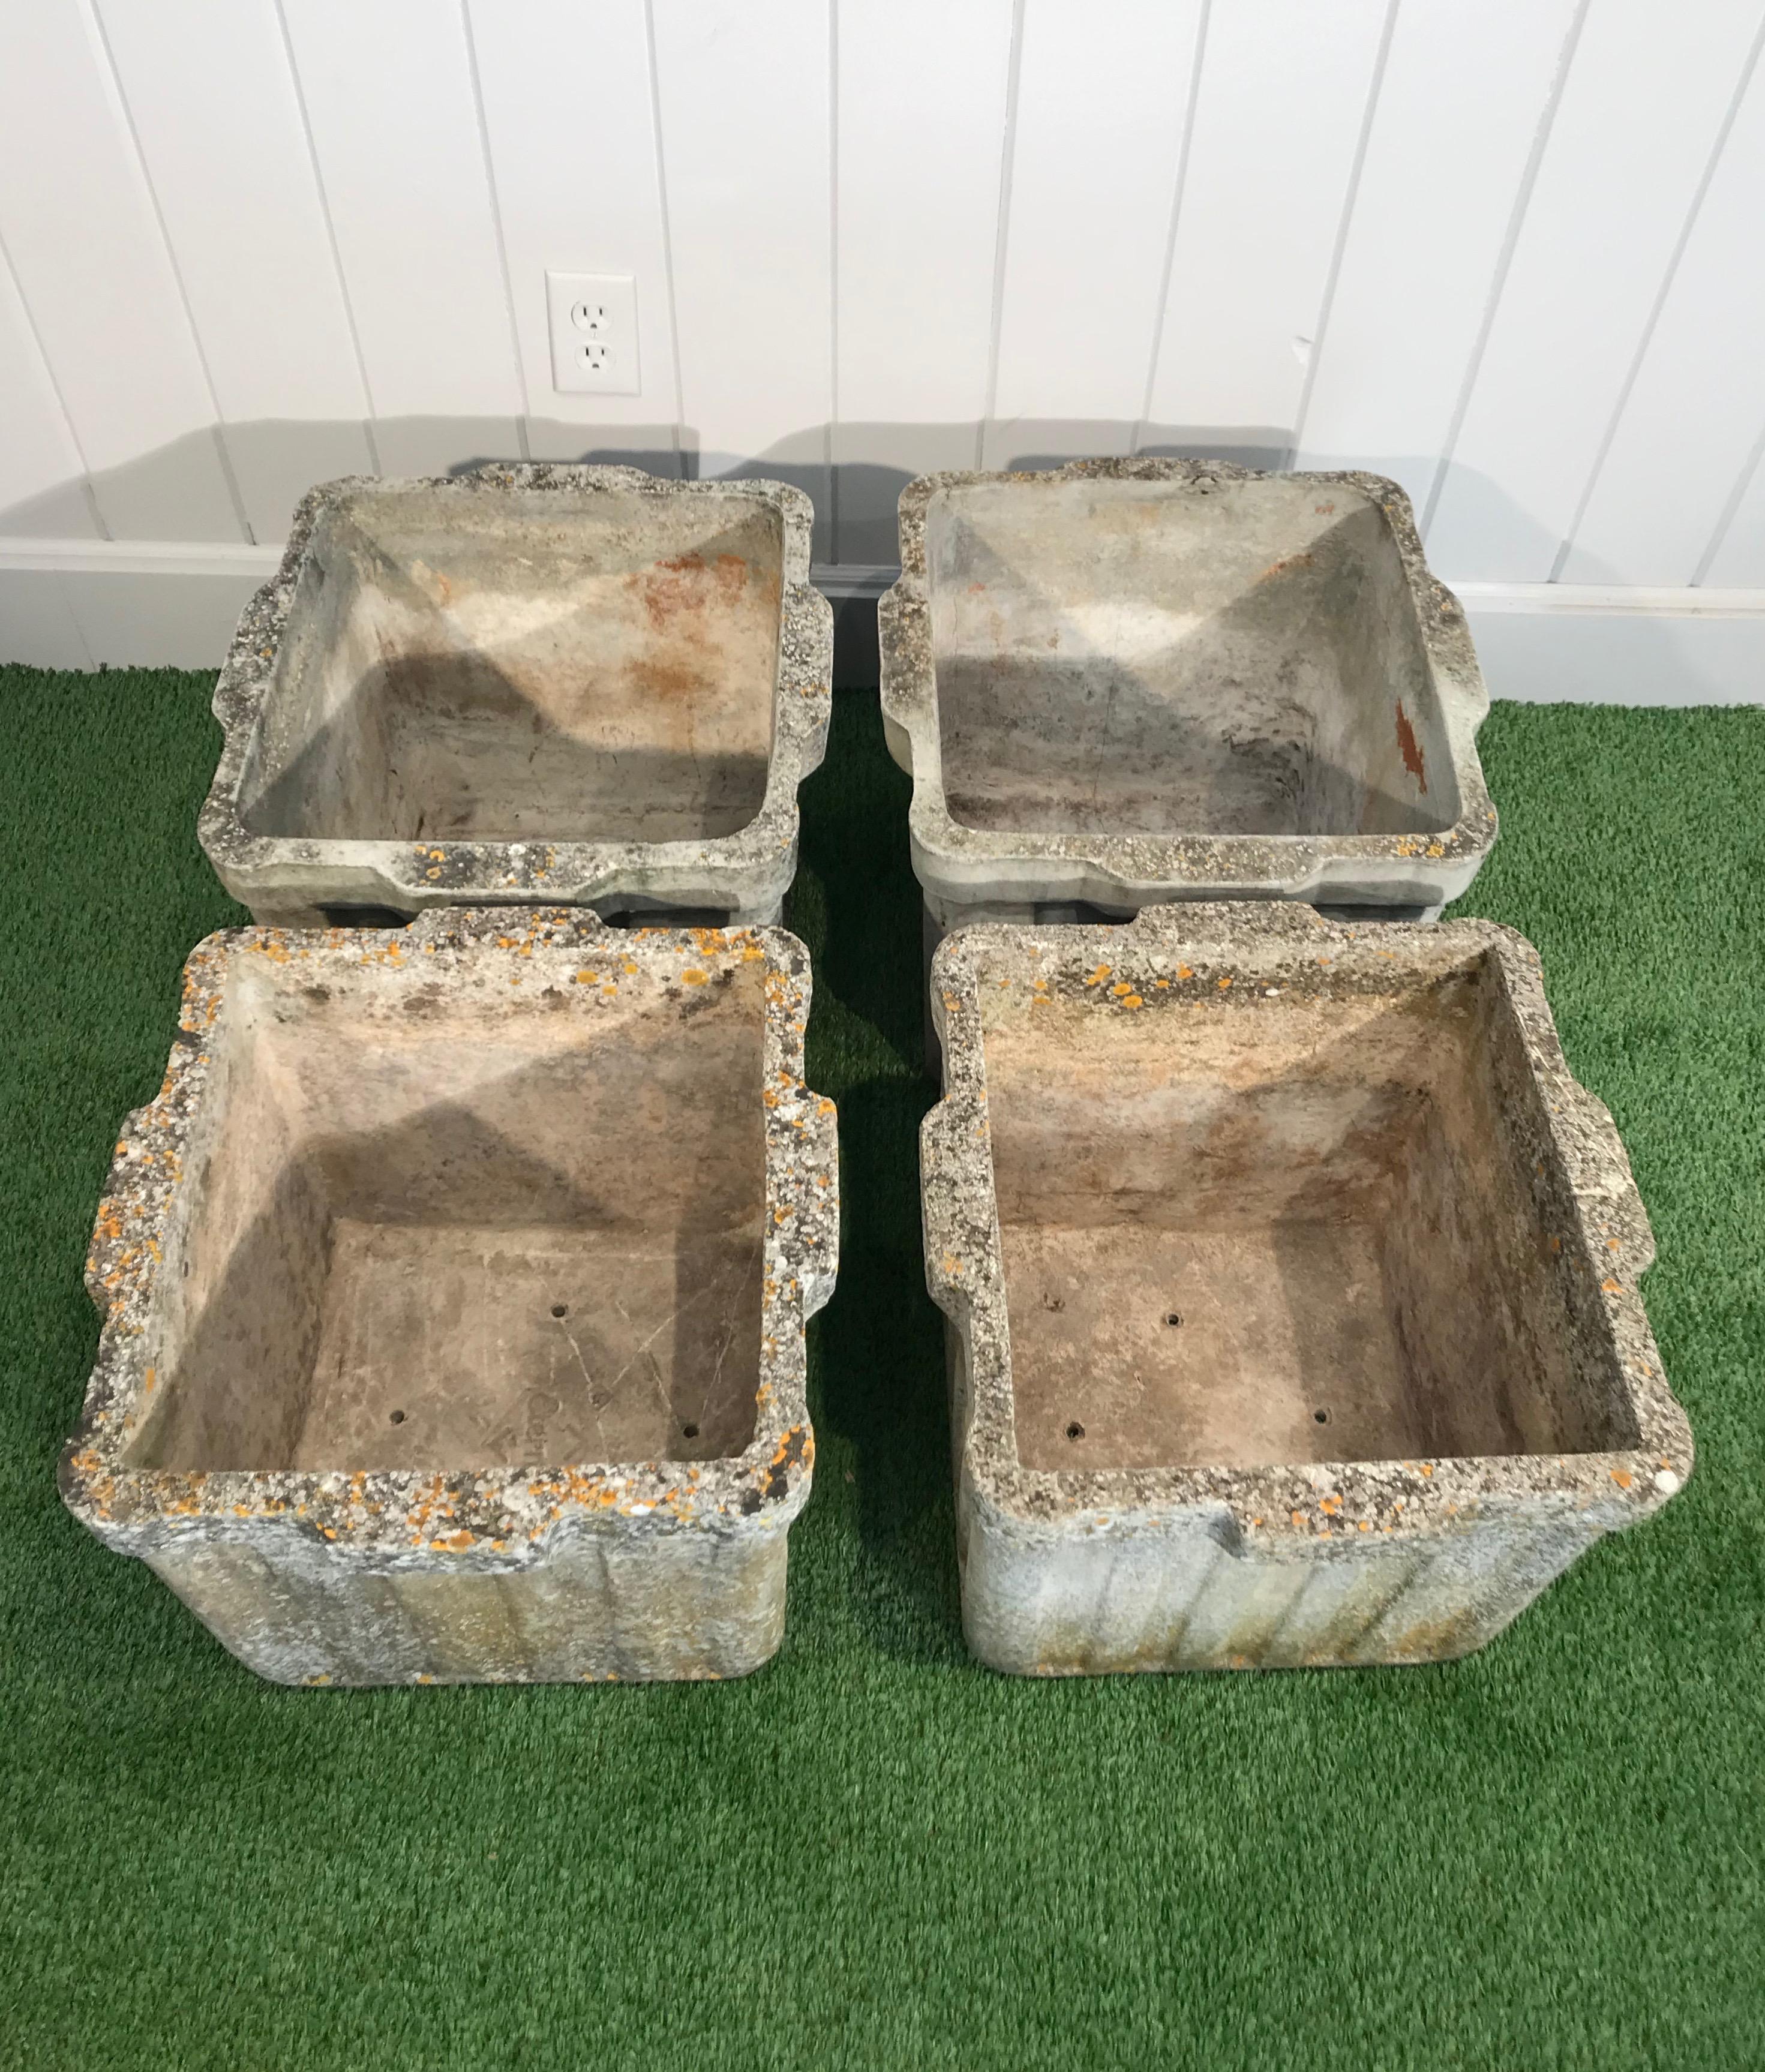 These ribbed planters with integral handles on two sides were designed by the iconic Willy Guhl and produced by Eternit of Switzerland in three sizes. These are the medium-sized ones. In very good structural condition, they feature a beautiful